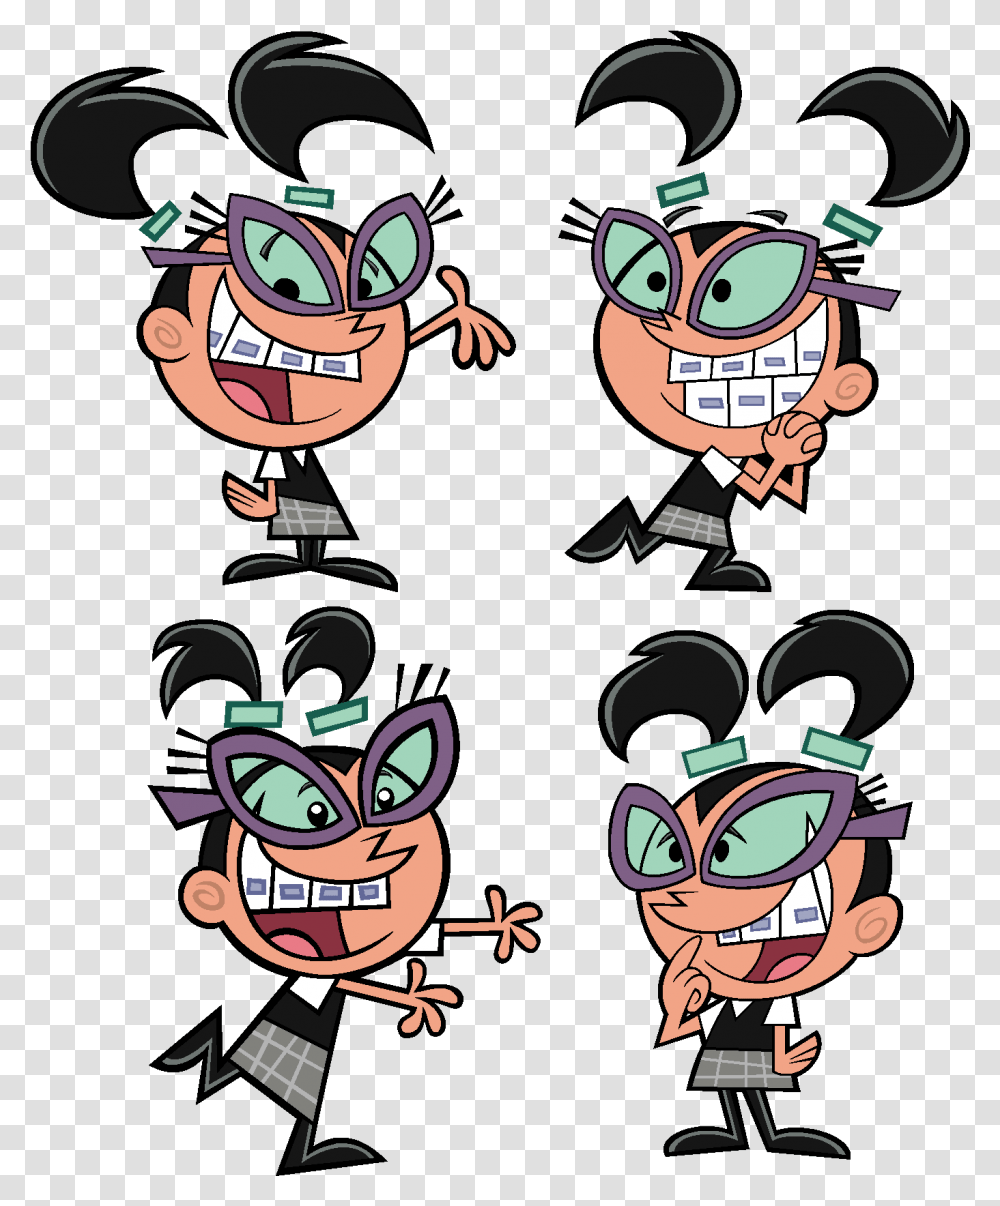 Common Images Of Tootie Fairy Oddparents Cartoon People Fairly Odd Parents Characters, Label, Drawing Transparent Png